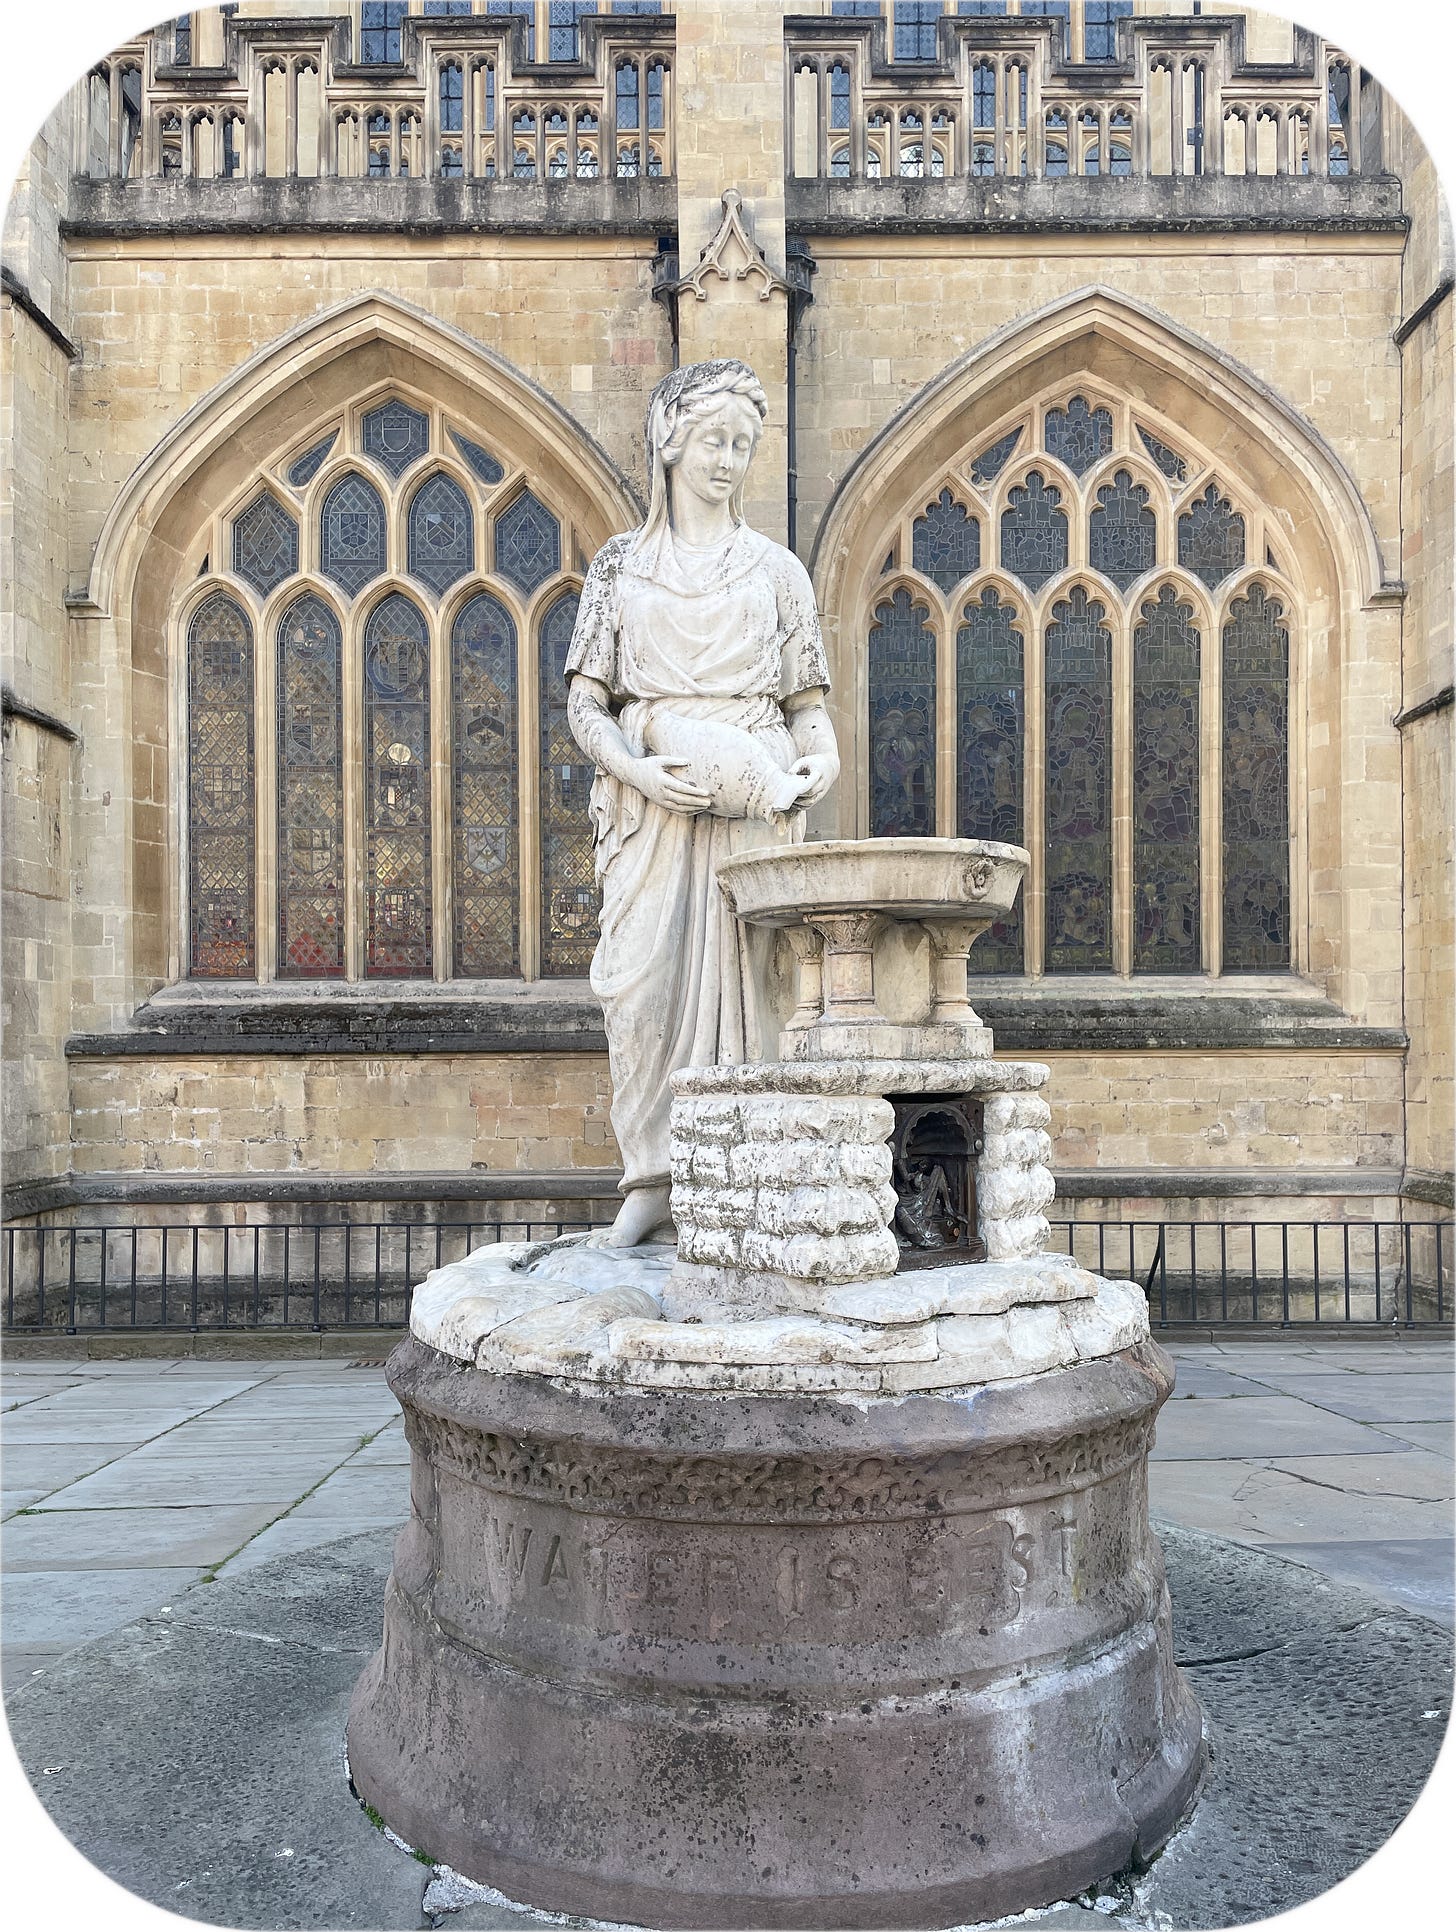 Water Is Best - Rebecca at the Well, Bath, England